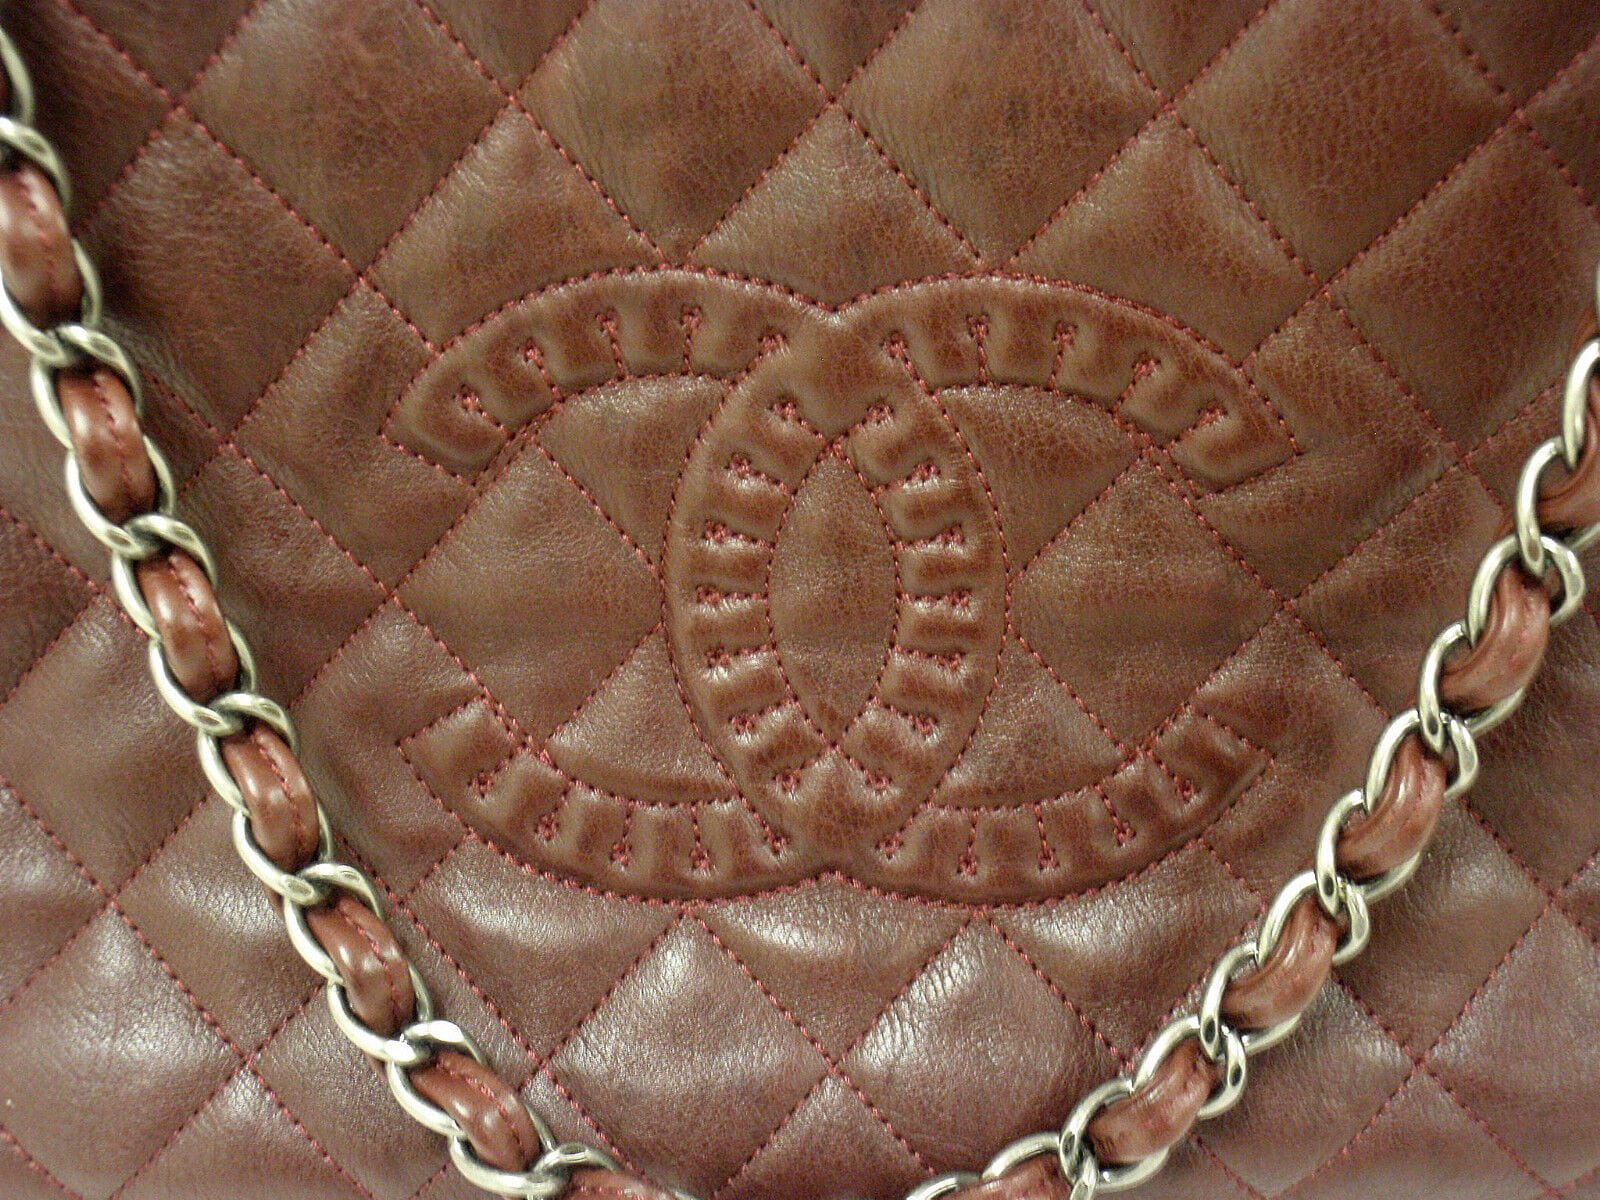 CHANEL Clothing, Shoes & Accessories:Women:Women's Bags & Handbags AUTHENTIC 2012 CHANEL ISTANBUL SOFT CAVIAR TOTE BURGUNDY LEATHER HANDBAG